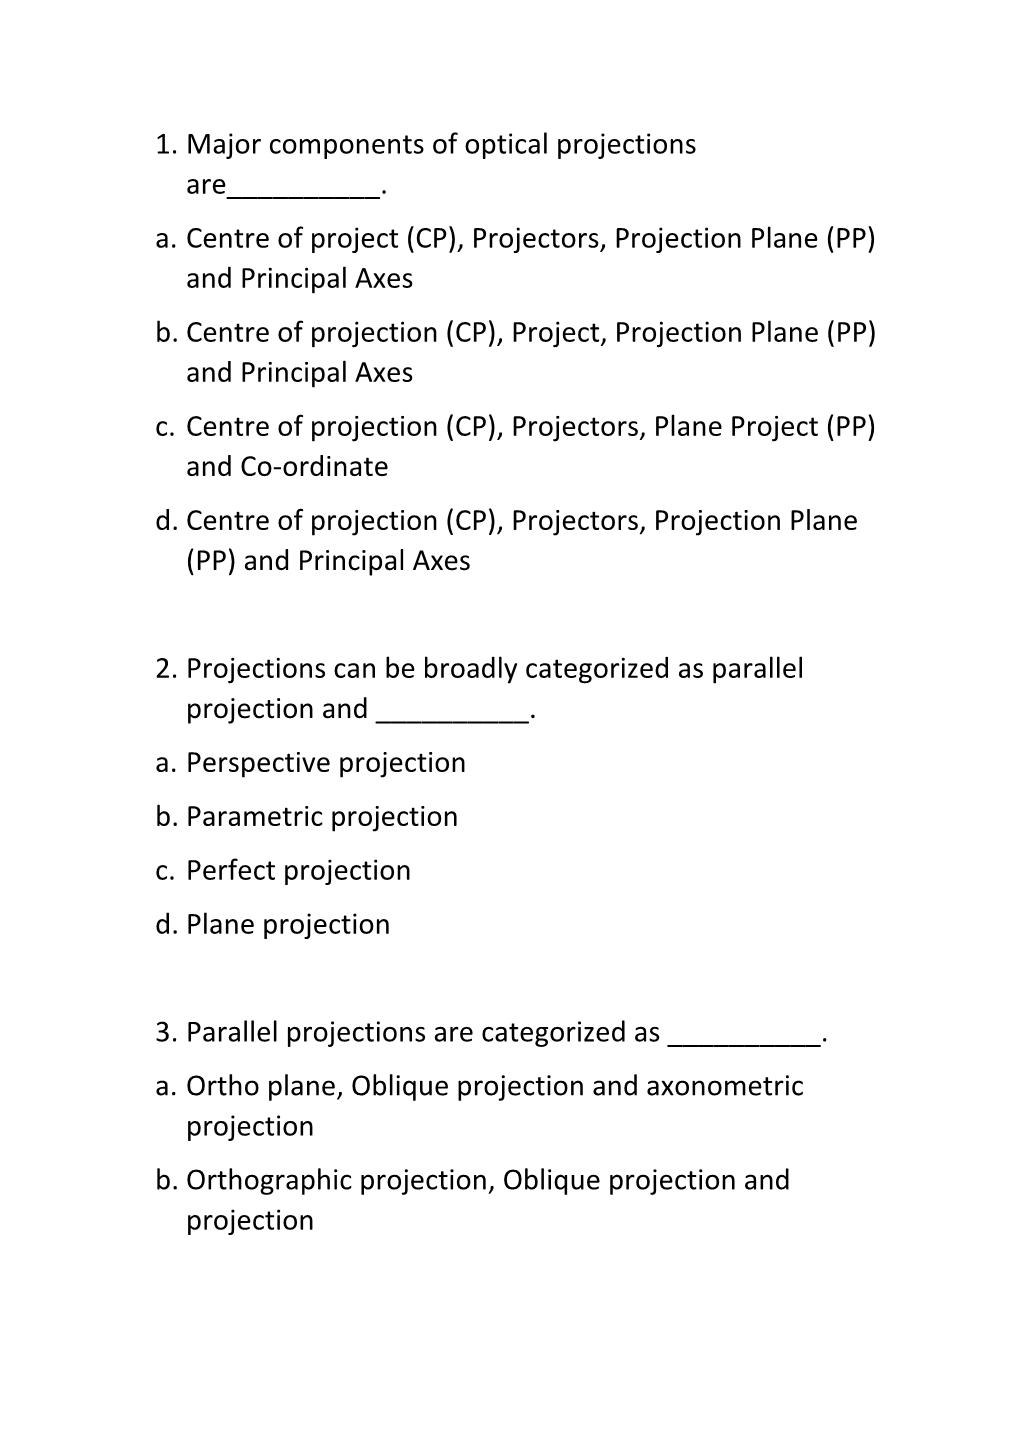 1. Major Components of Optical Projections Are______